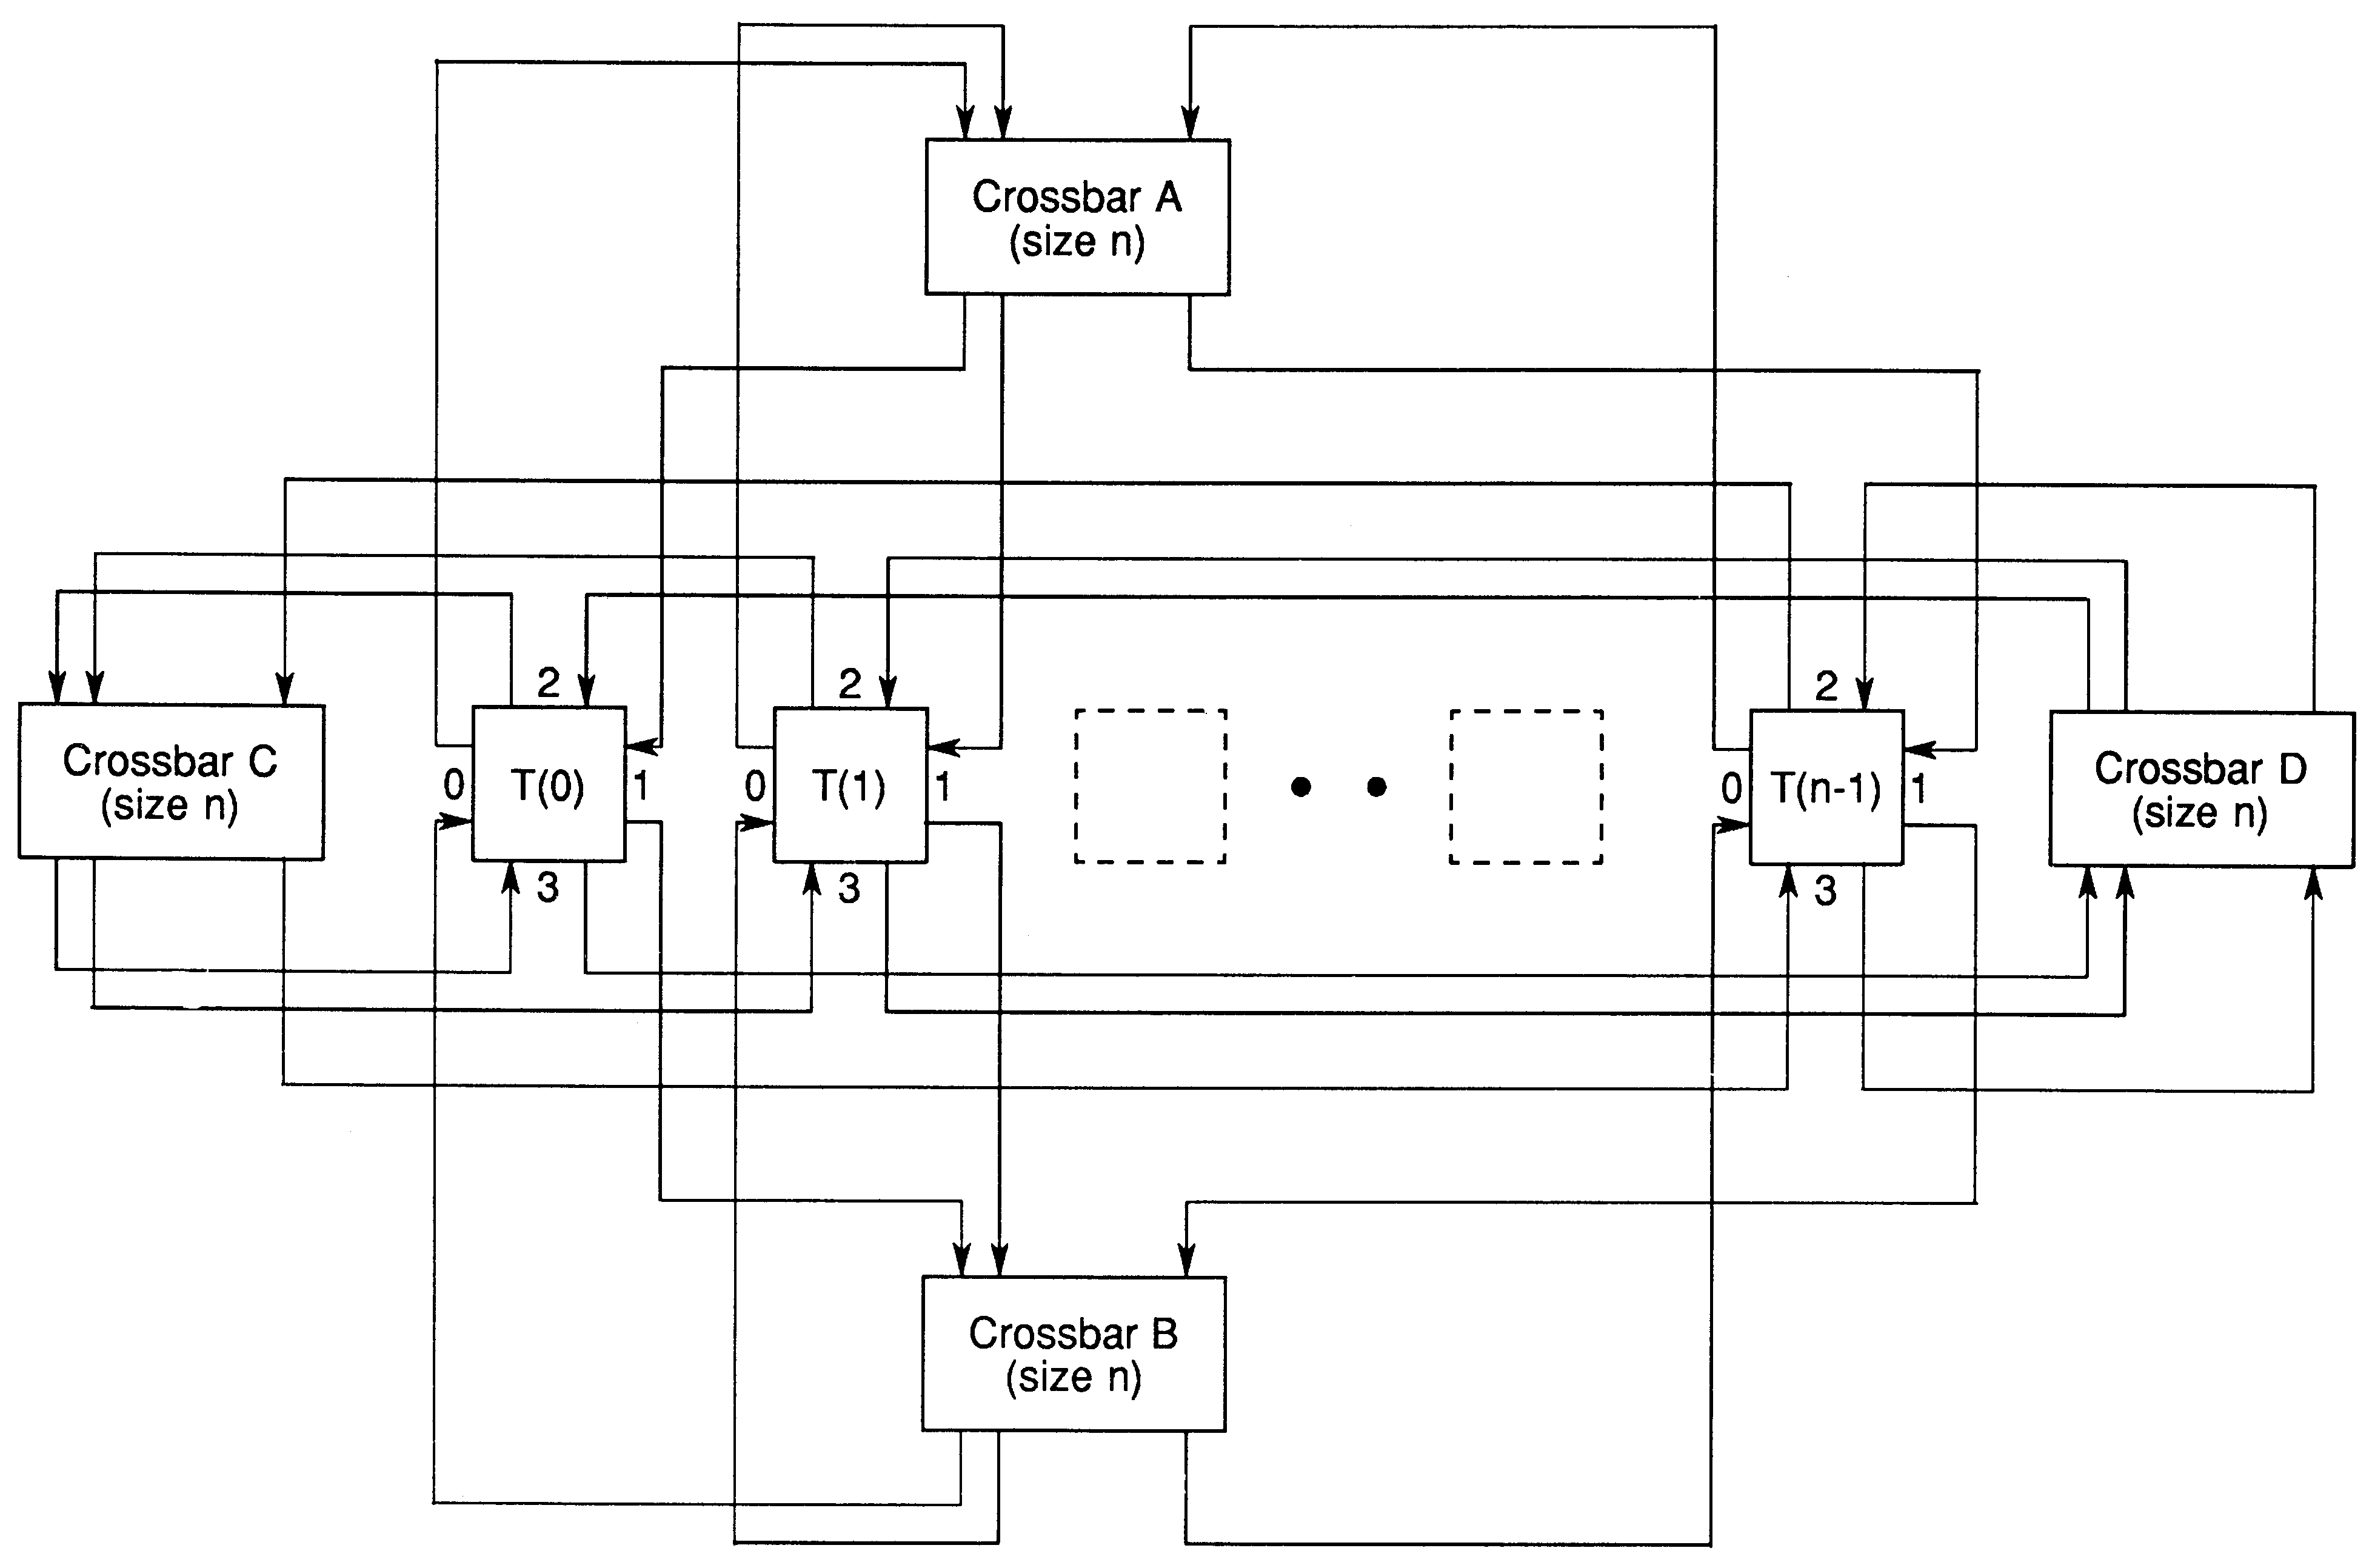 Complete
connectivity of a network using four crossbars